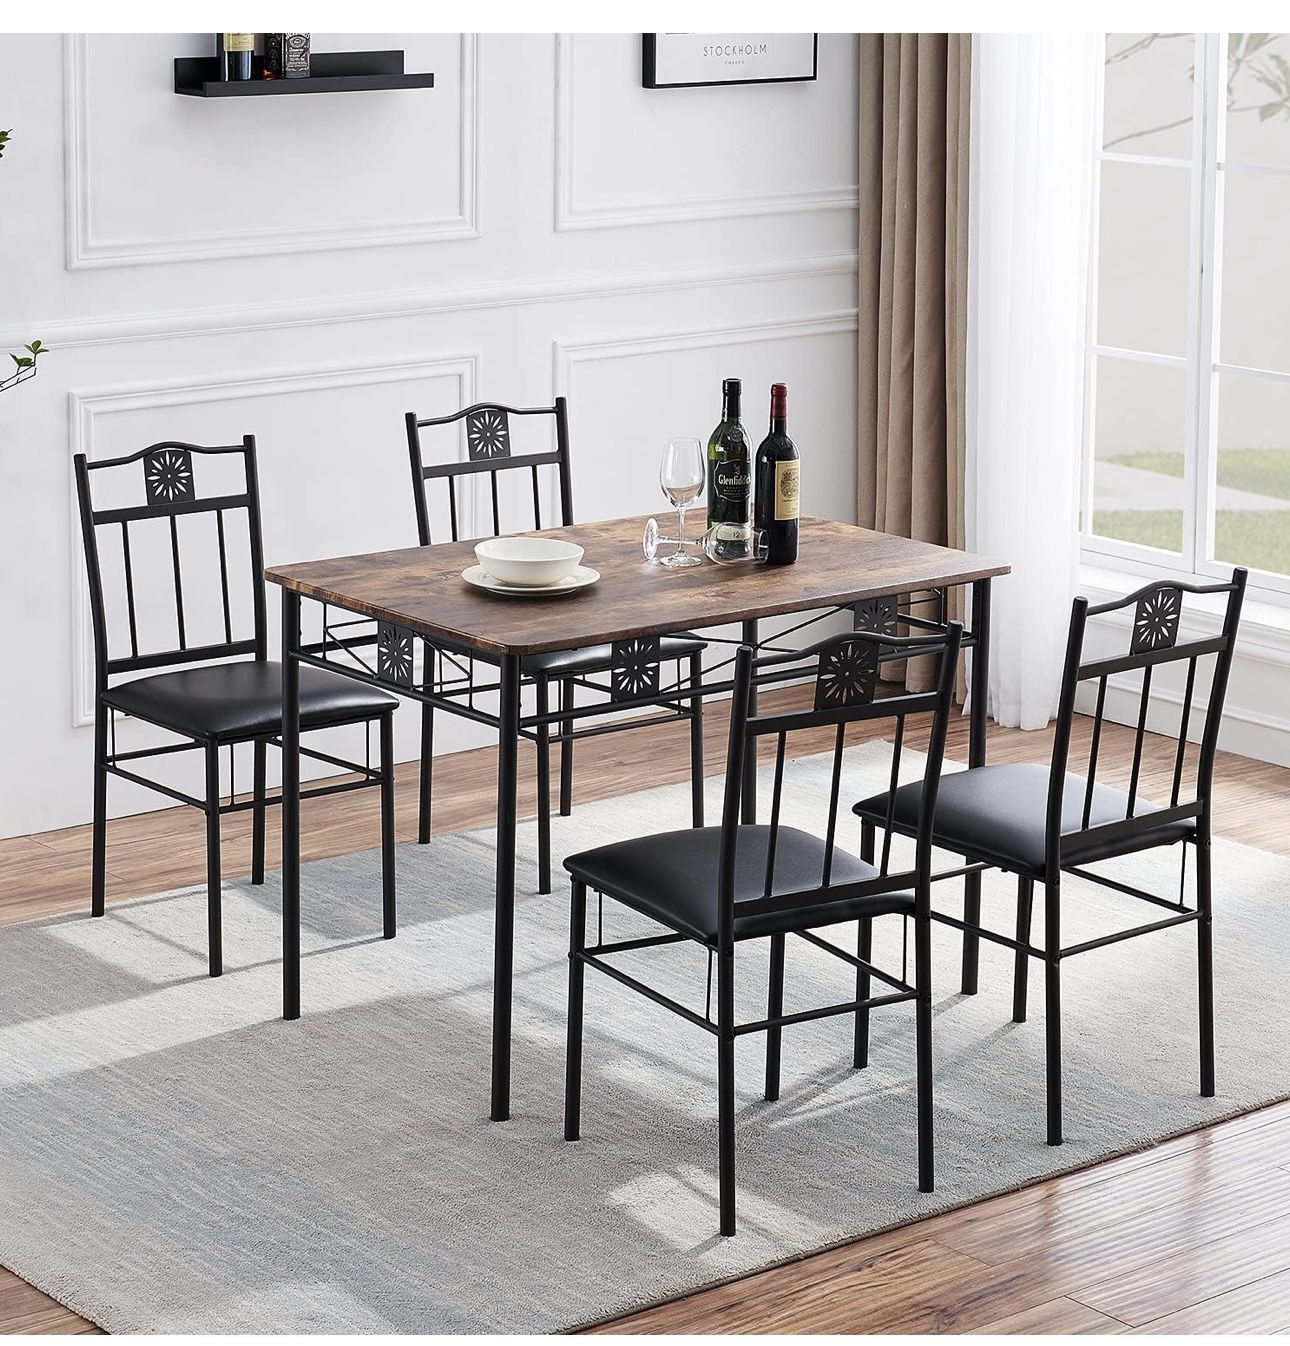 Kitchen Dining Table for 4[no chairs only table]